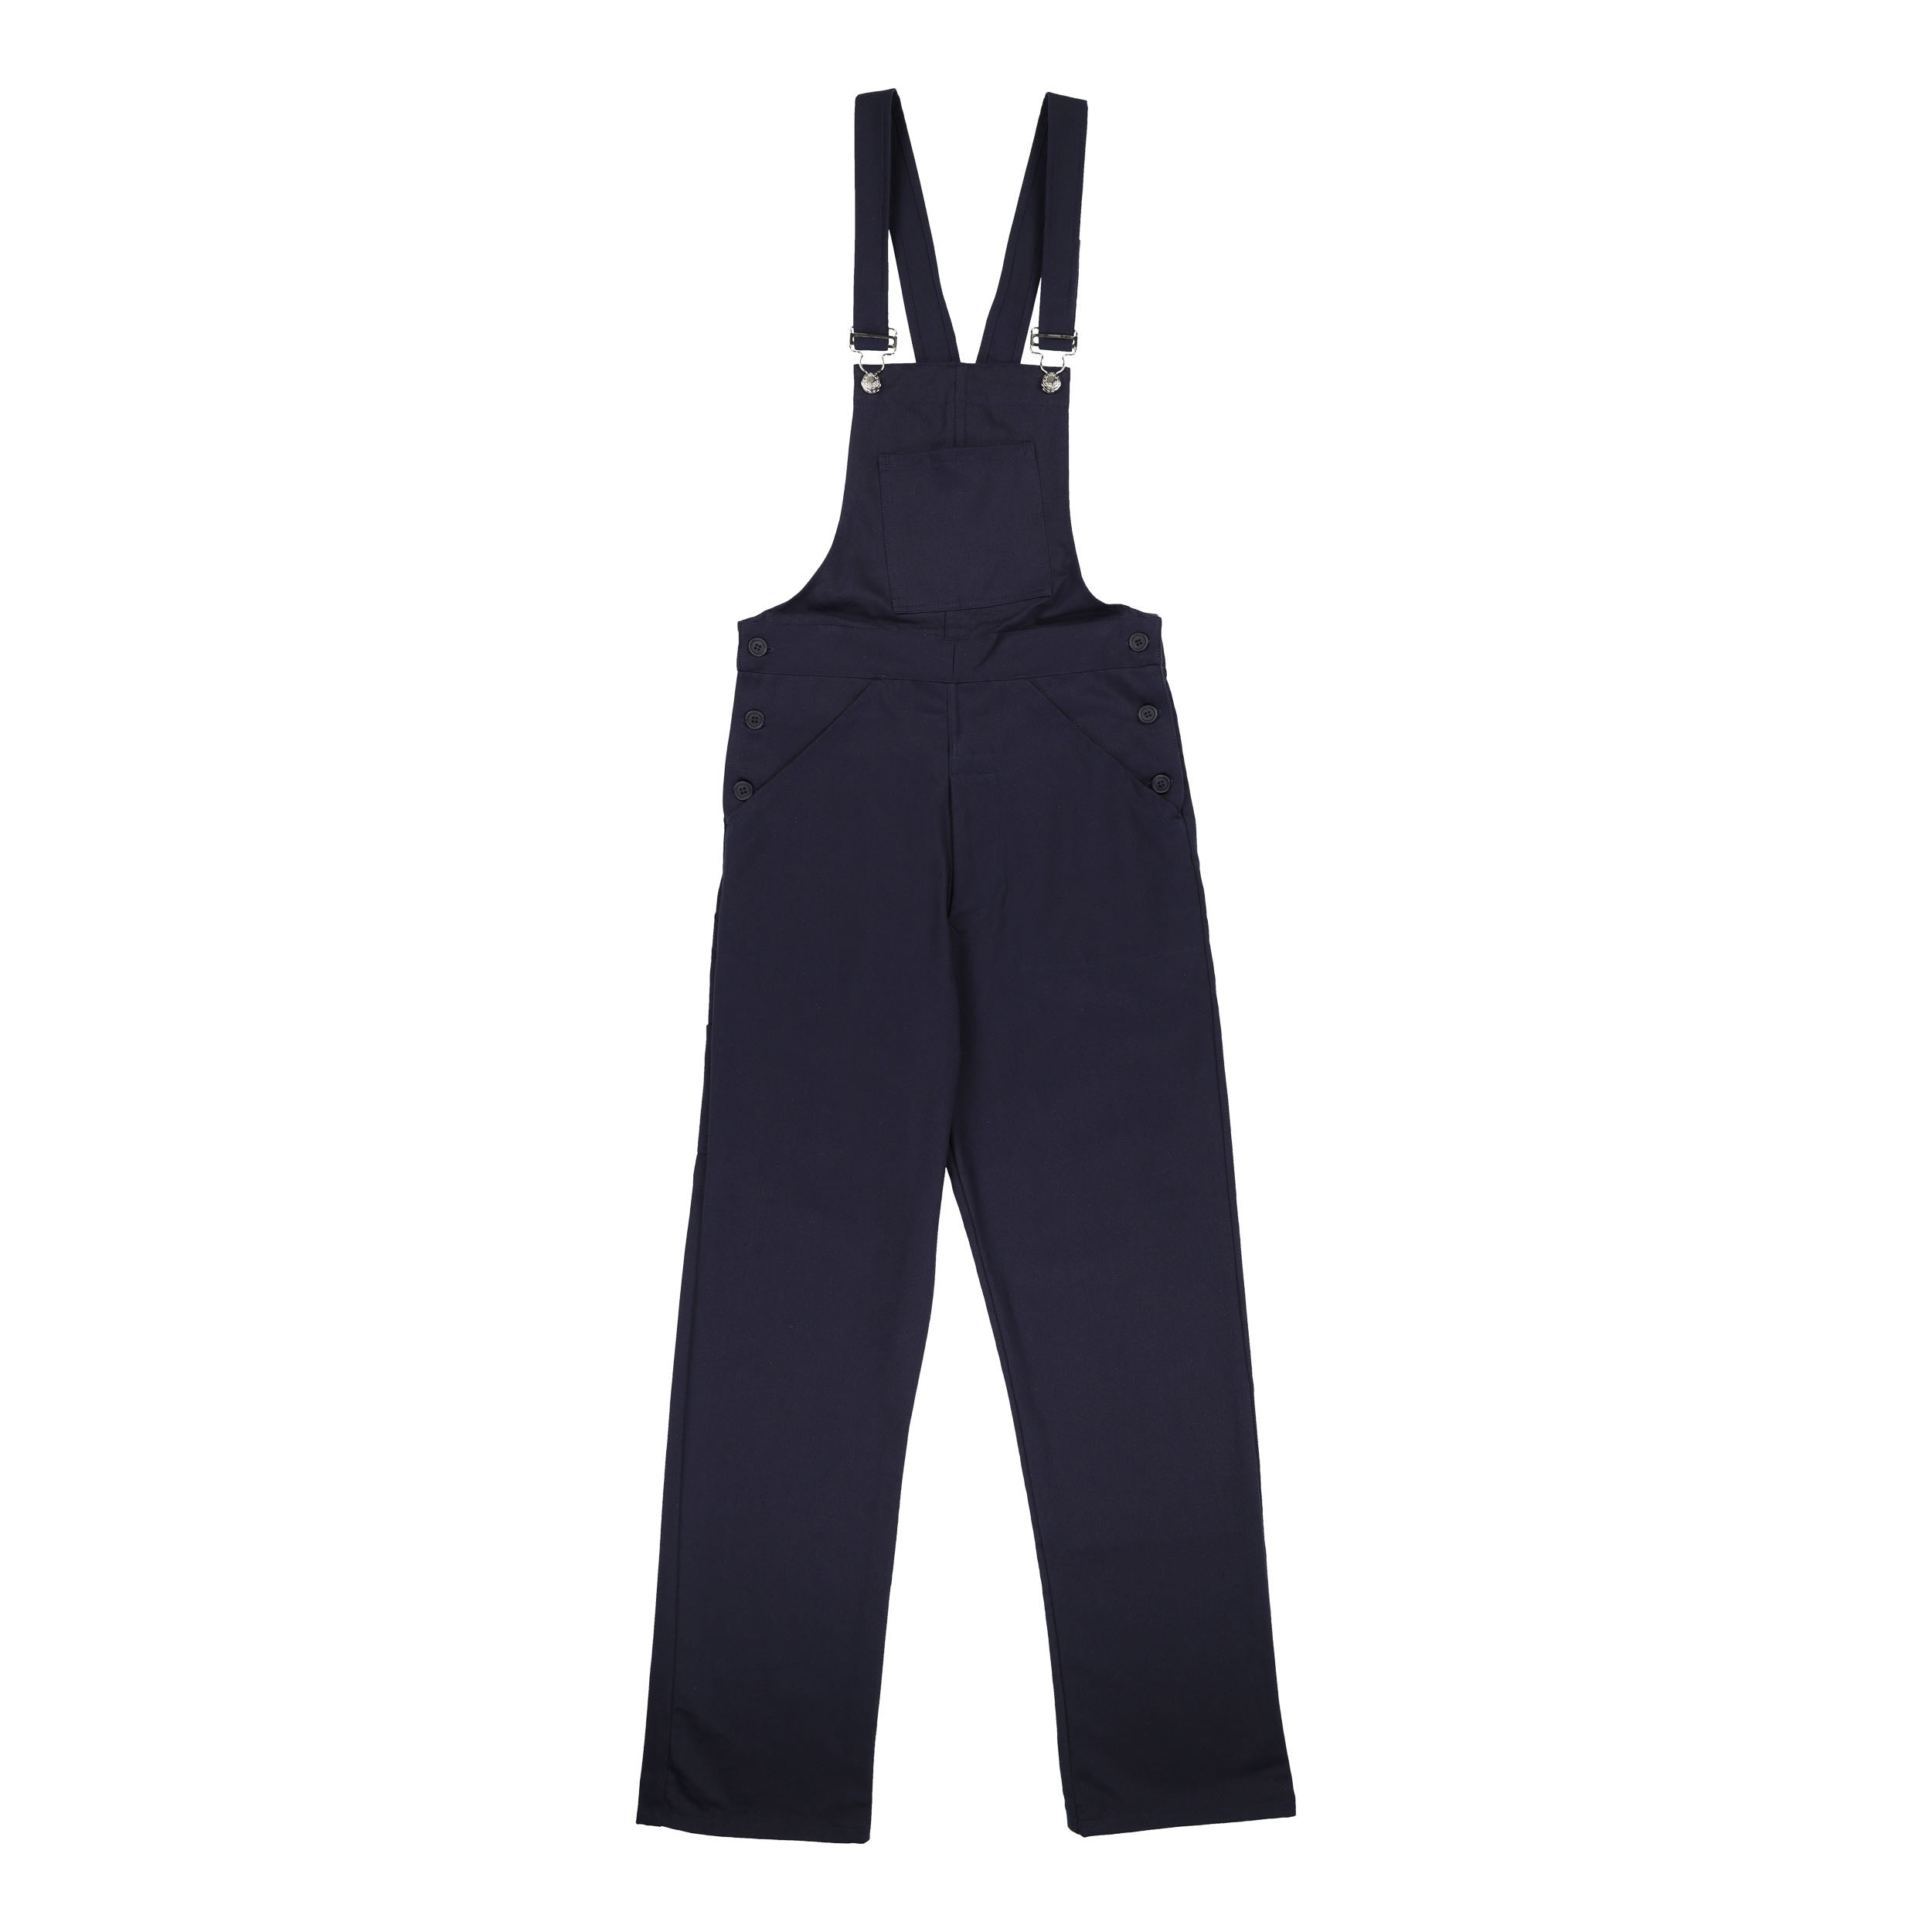 Navy Carrier Company full length Men's Dungarees